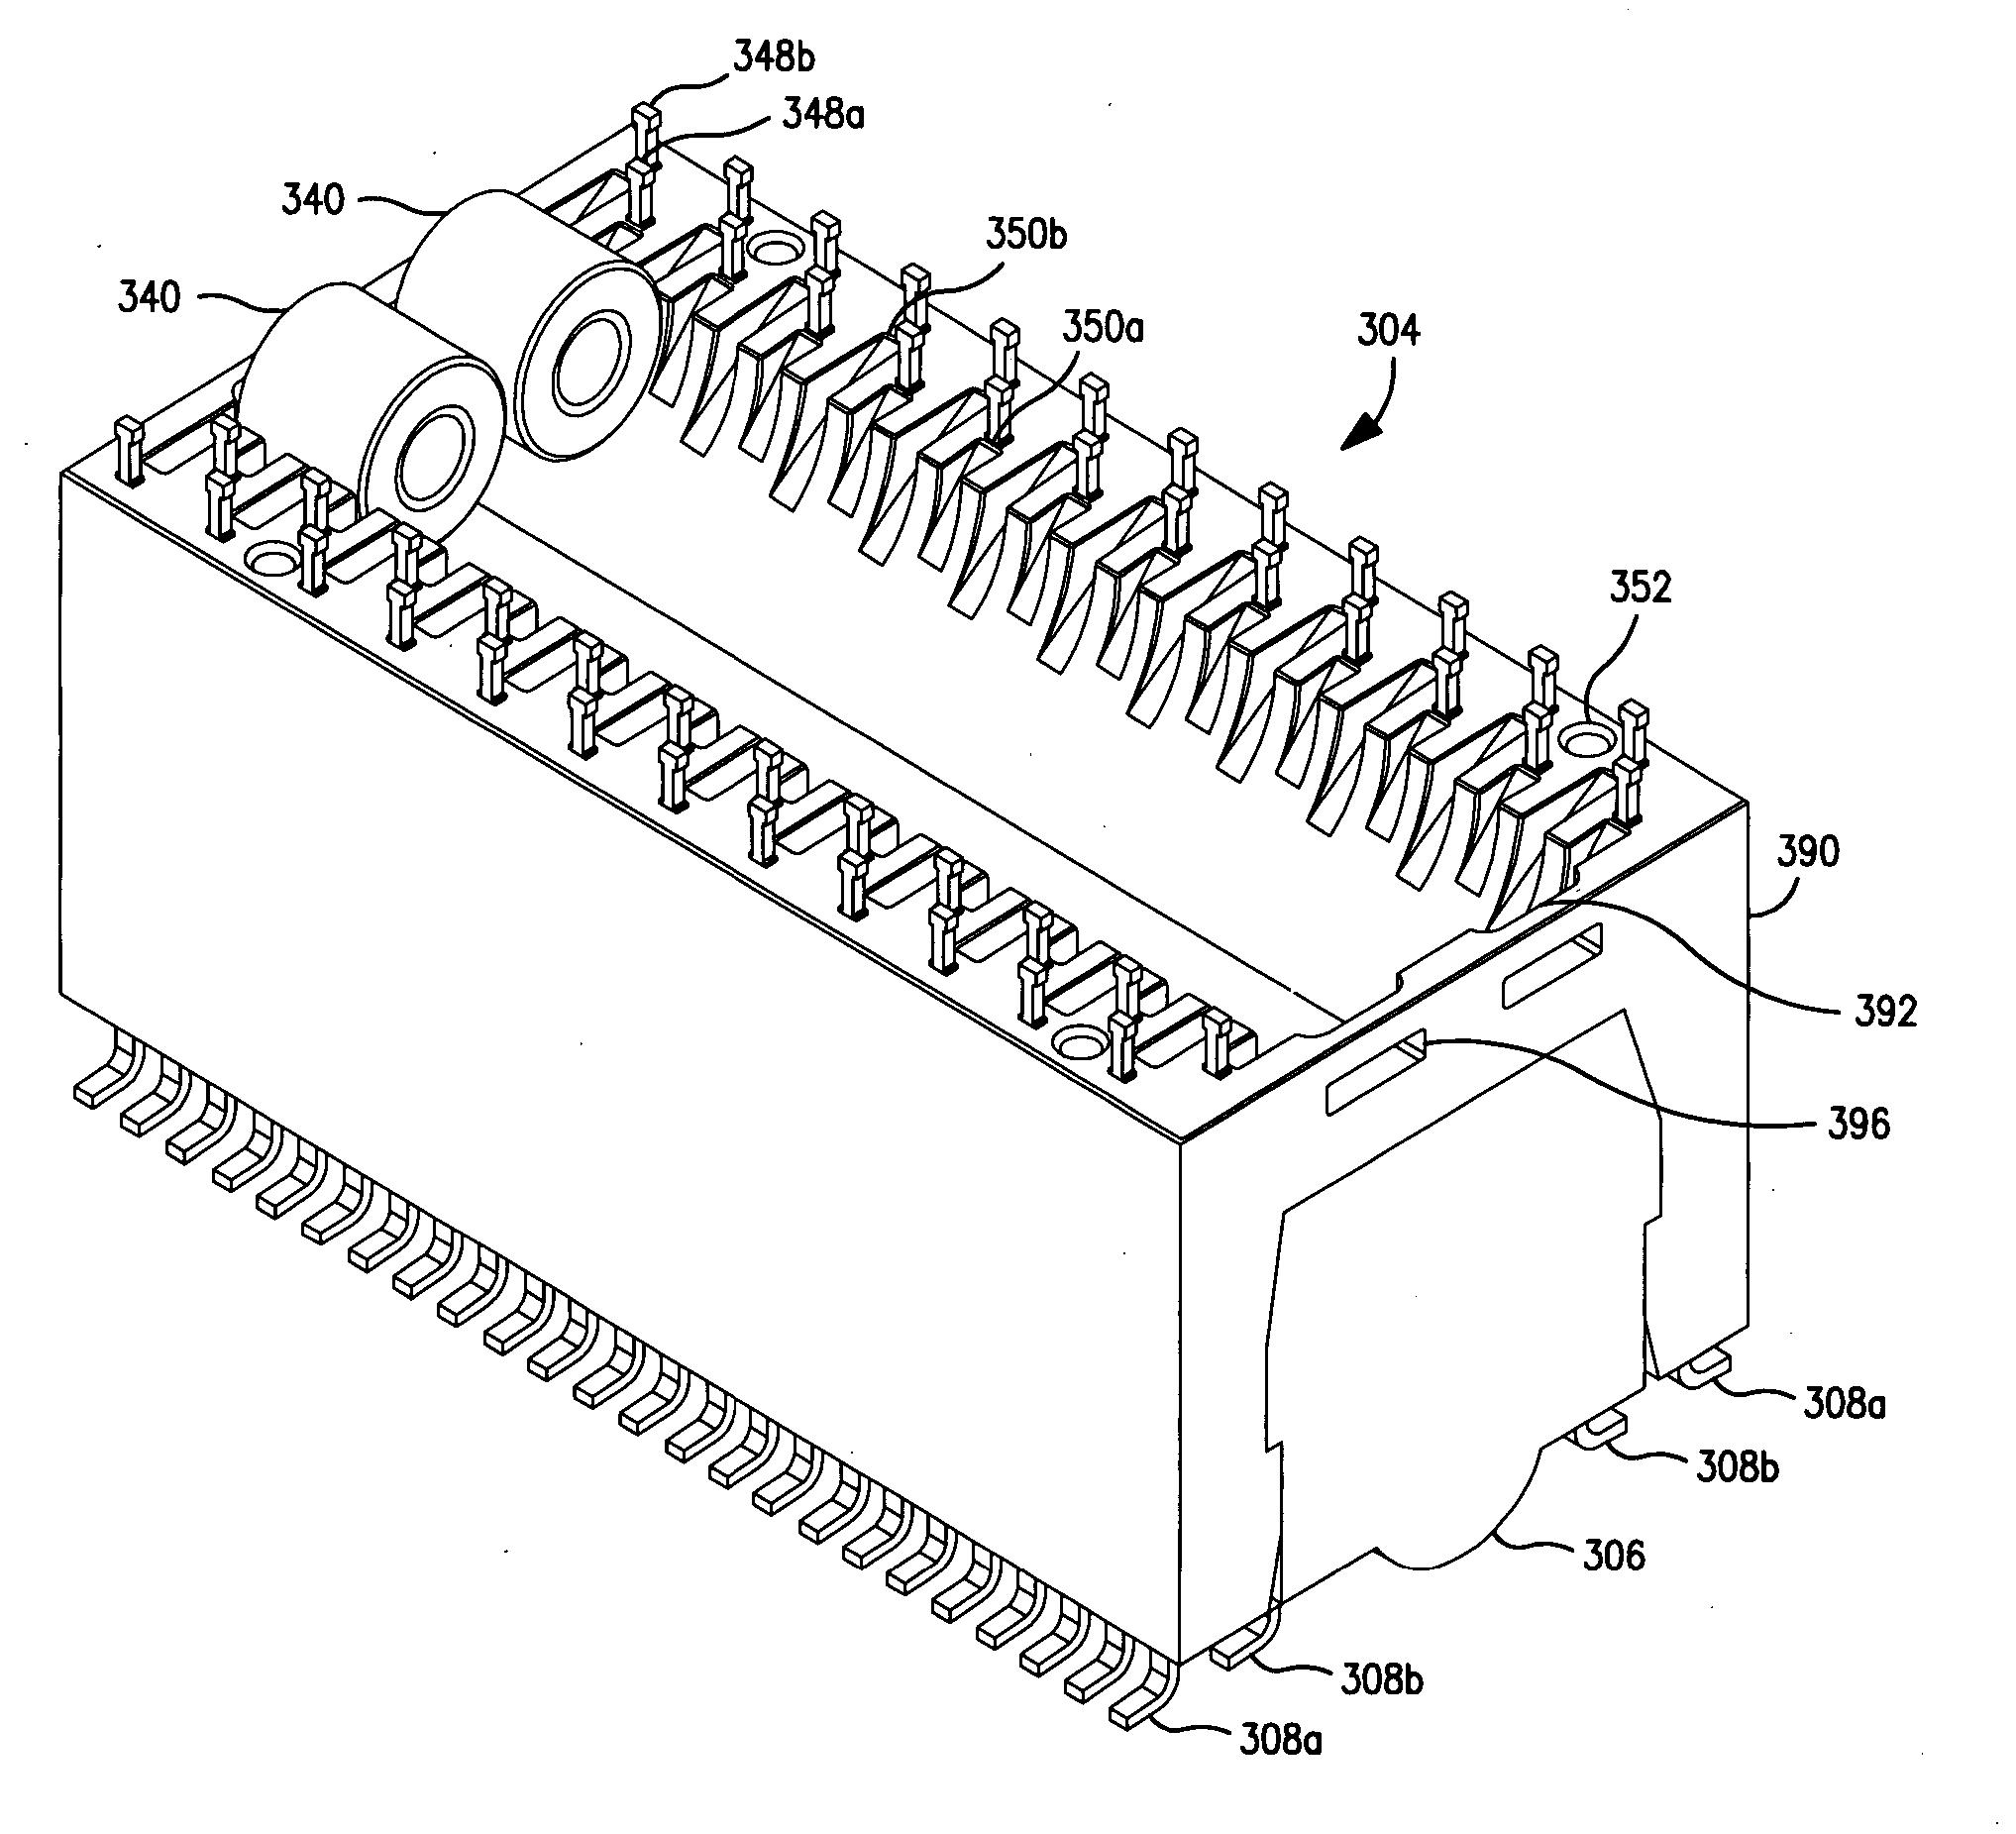 Modular electronic header assembly and methods of manufacture